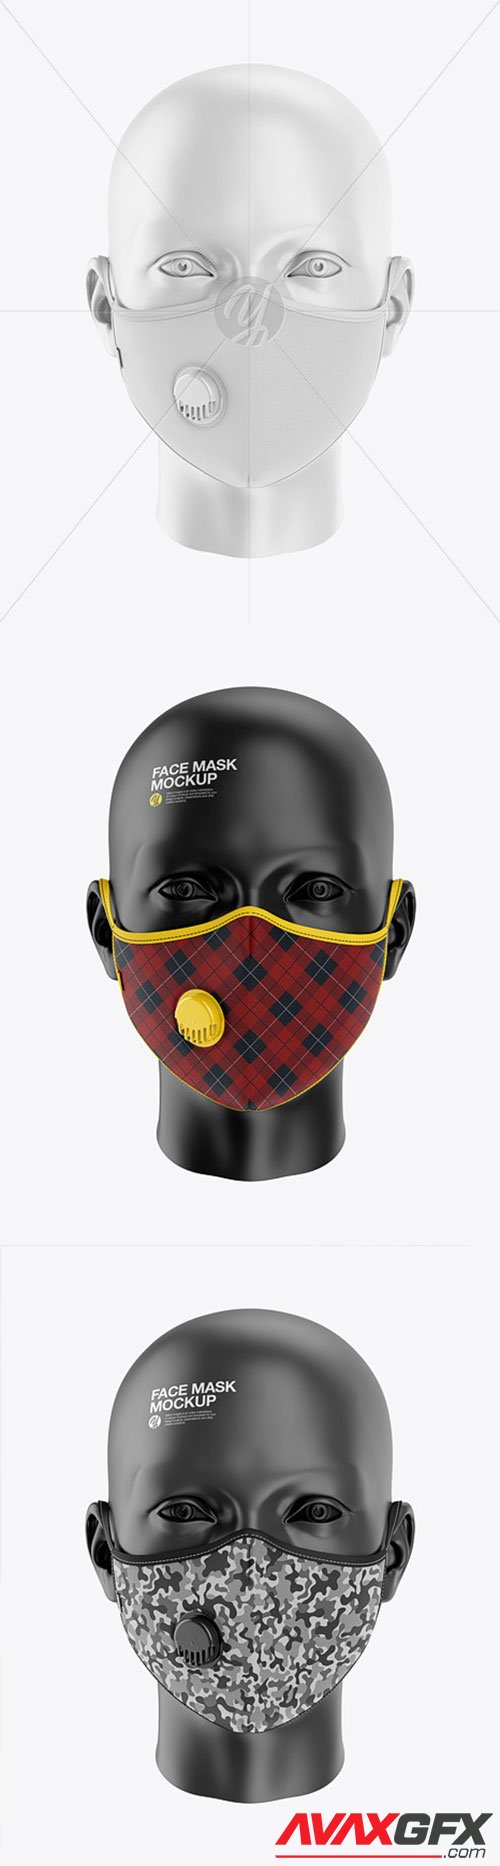 Anti-Pollution Face Mask with Exhalation Valve 62201